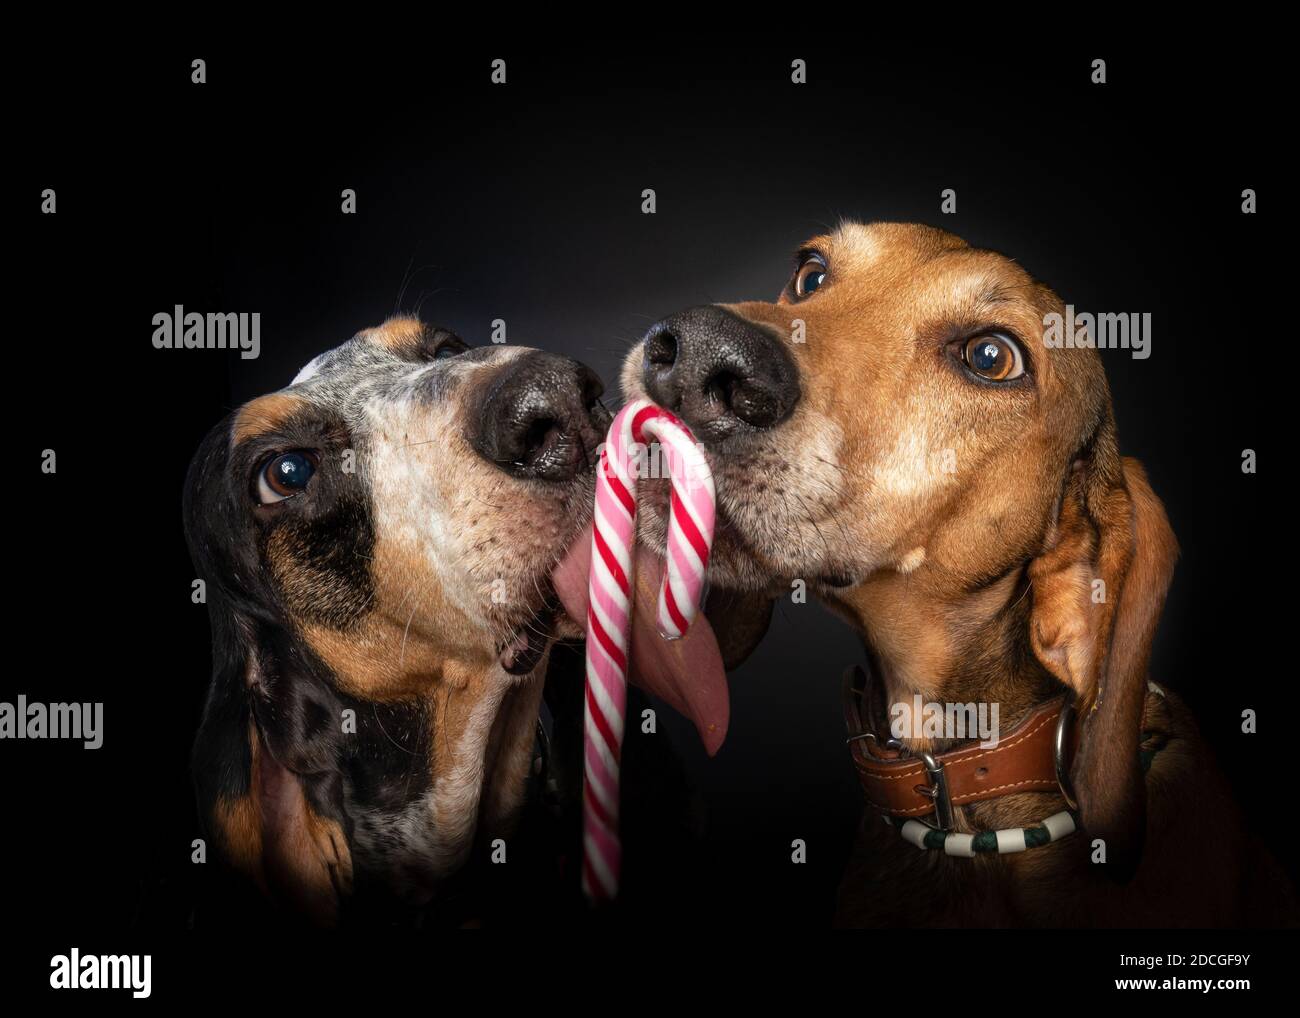 Christmas studio portrait of two Segugio dogs sharing a candy cane in front of a black background. Stock Photo